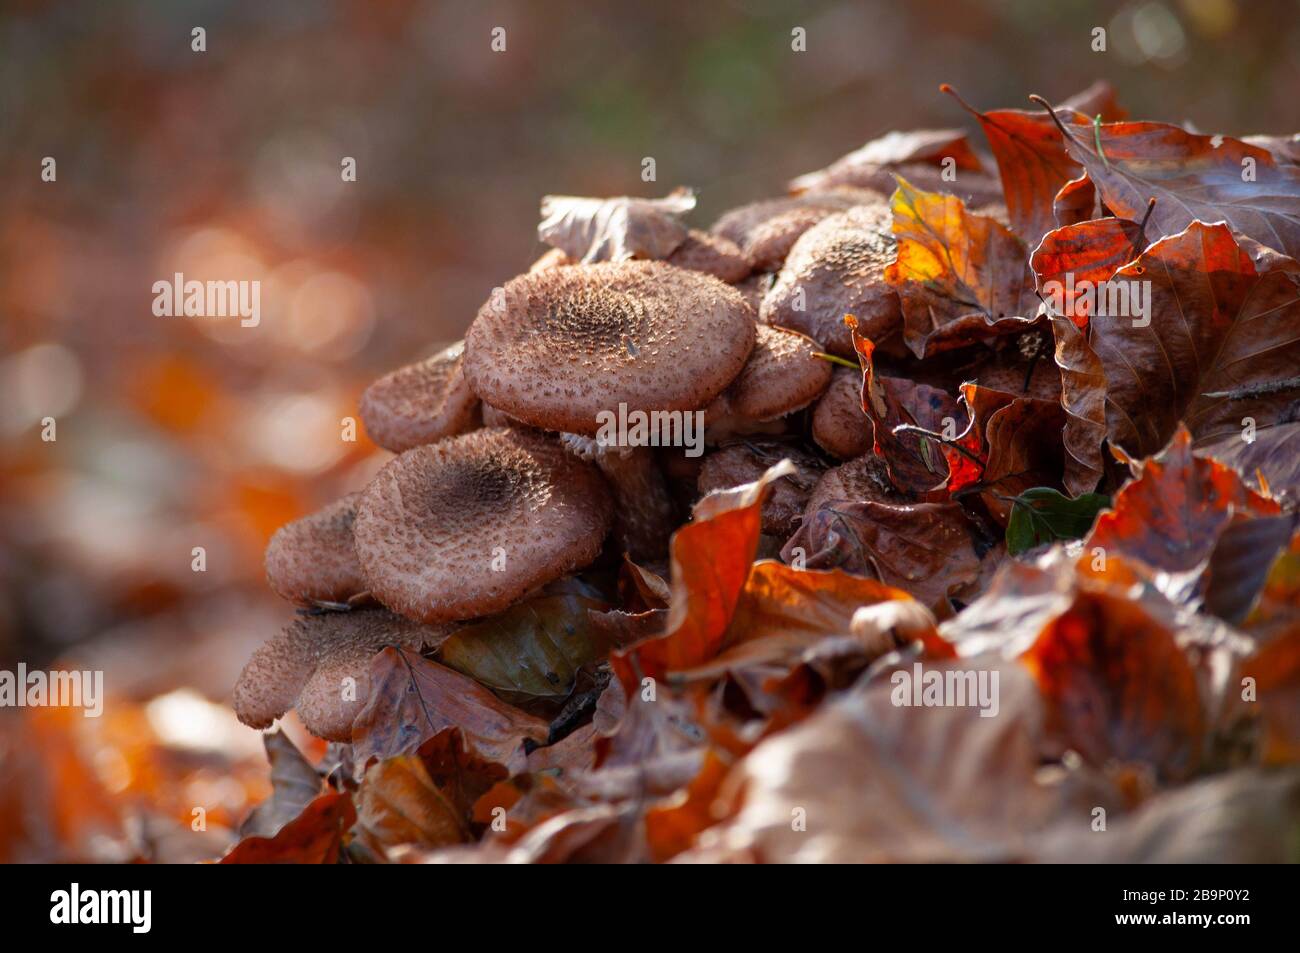 Group of the honey agaric mushrooms in the forest brown foliage Stock Photo